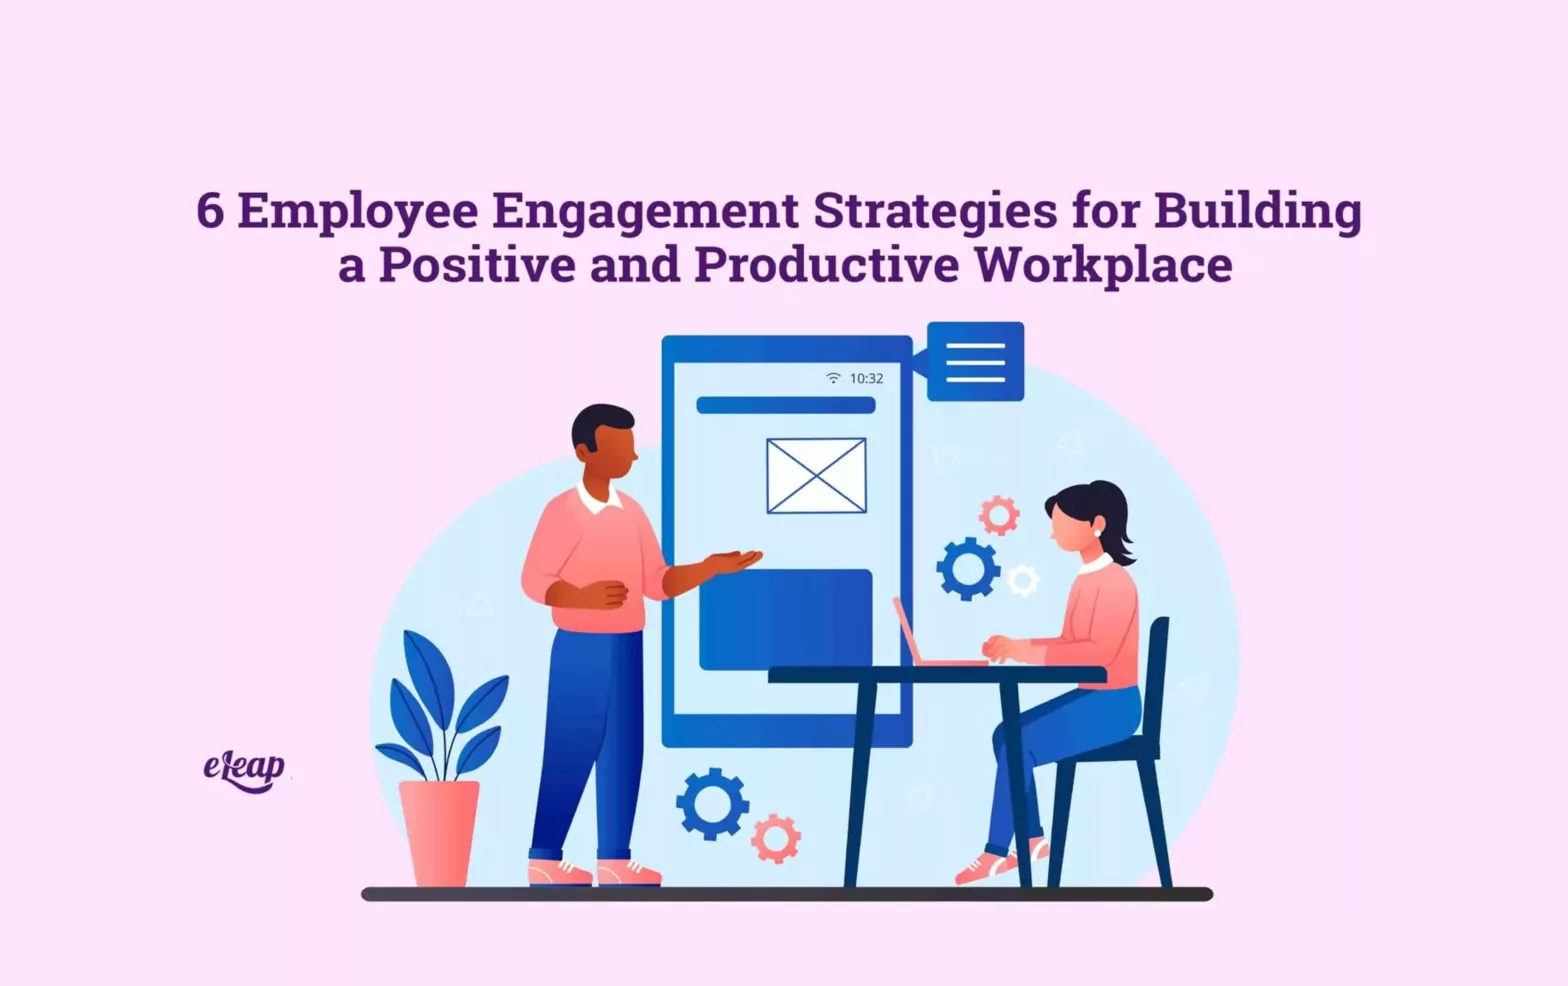 6 Employee Engagement Strategies for Building a Positive and Productive Workplace